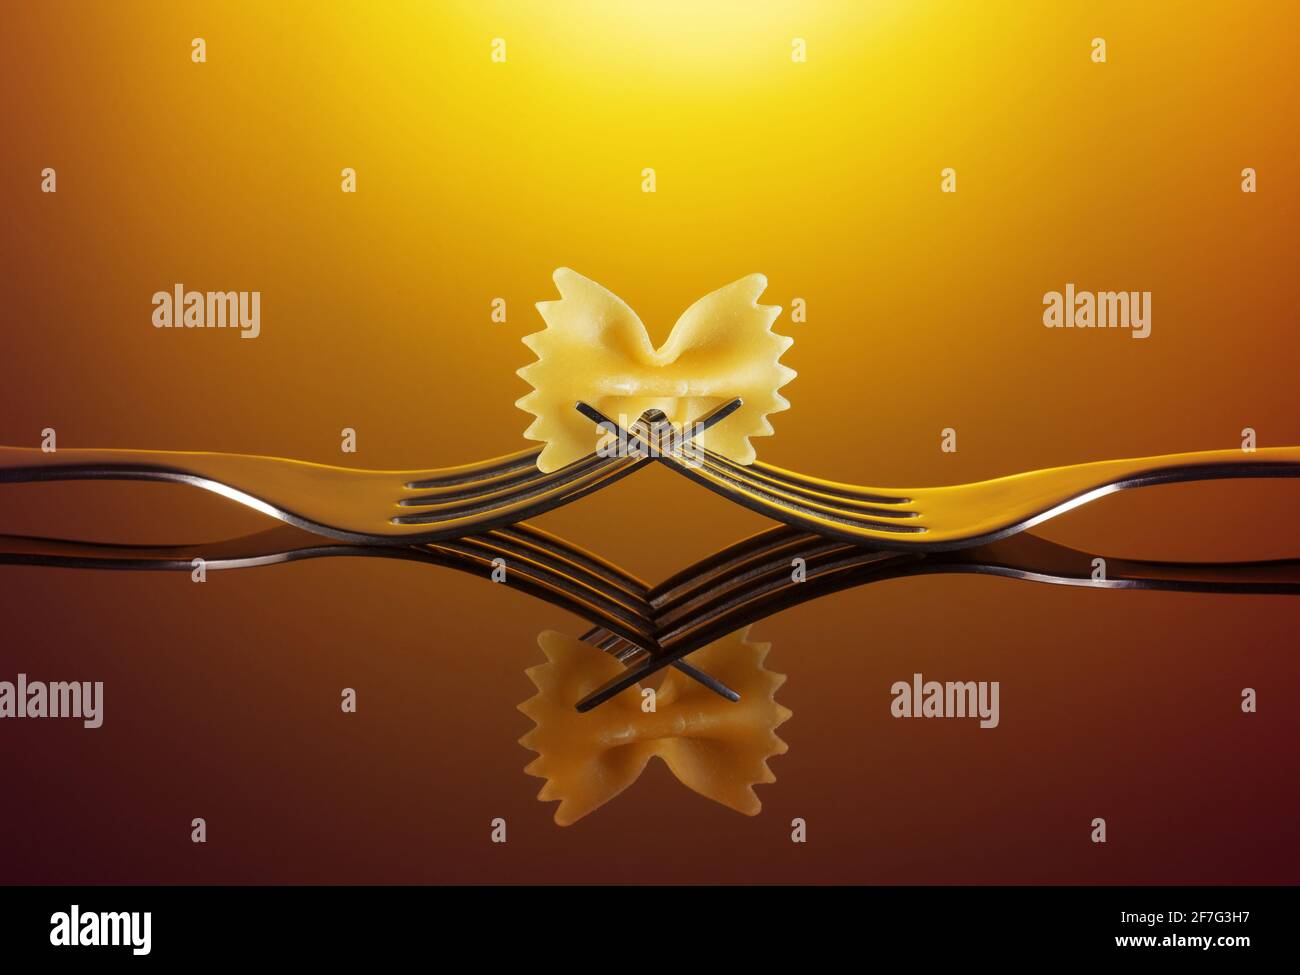 bow tie pasta over intertwined forks on orange background Stock Photo